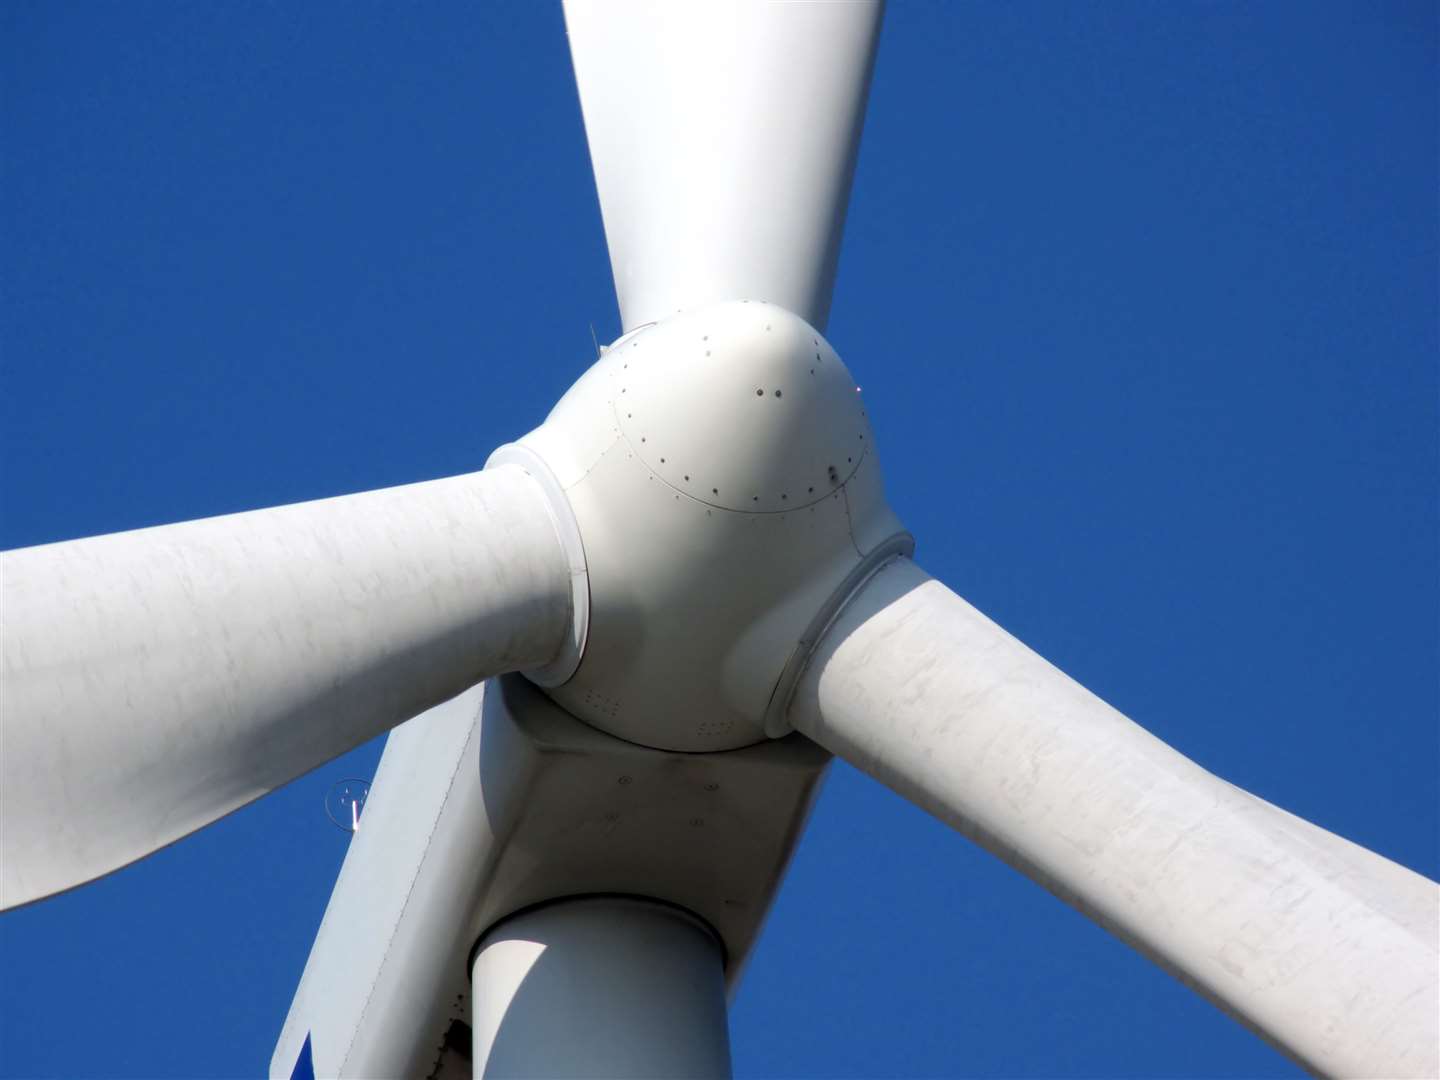 A previous application for a 22 turbine wind farm at Sallachy Estate was rejected by Scottish Ministers.